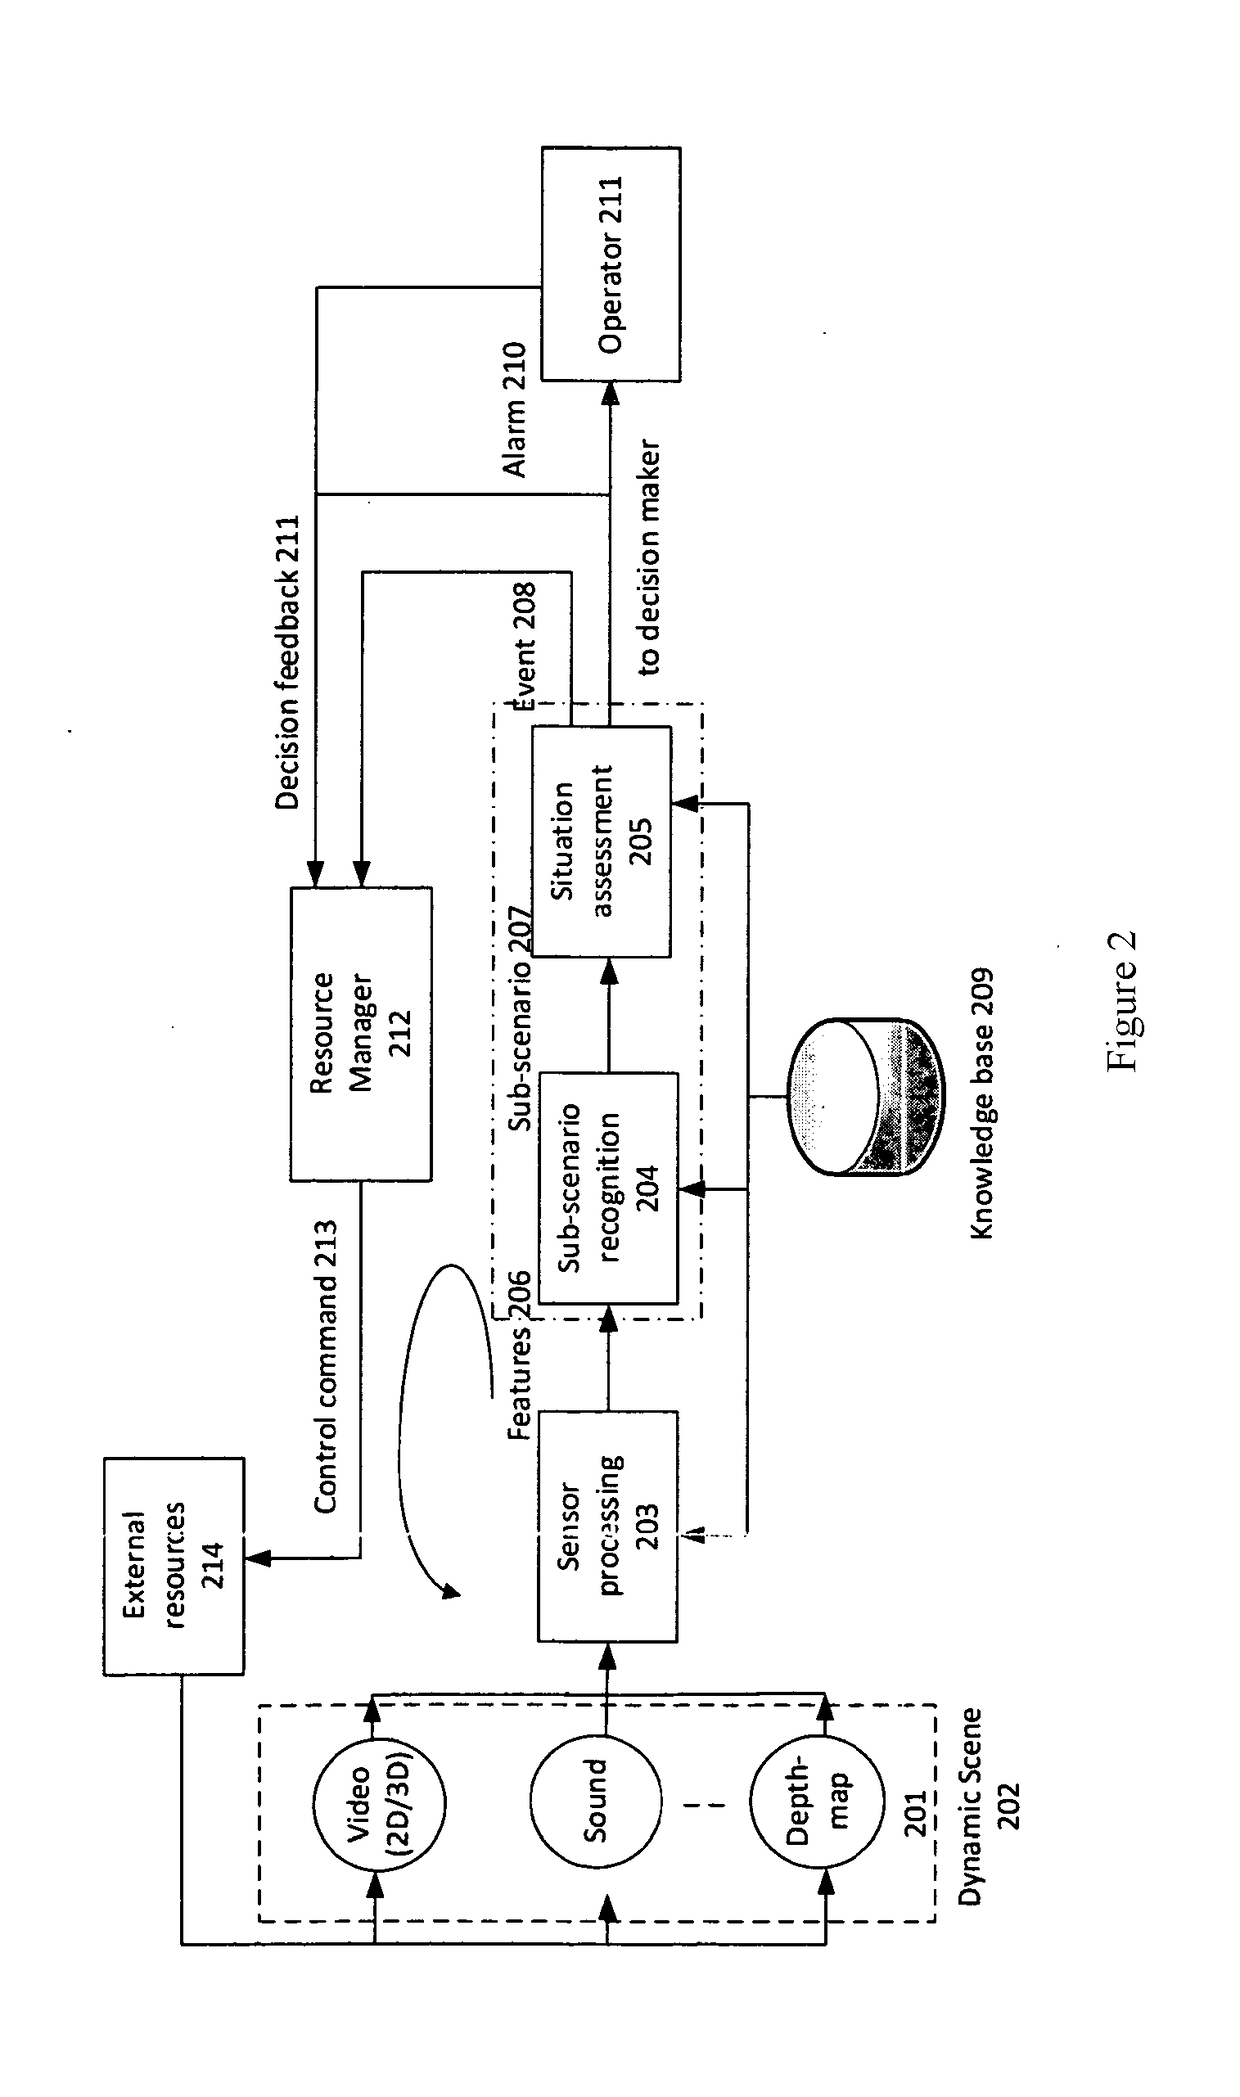 System and method for event monitoring and detection